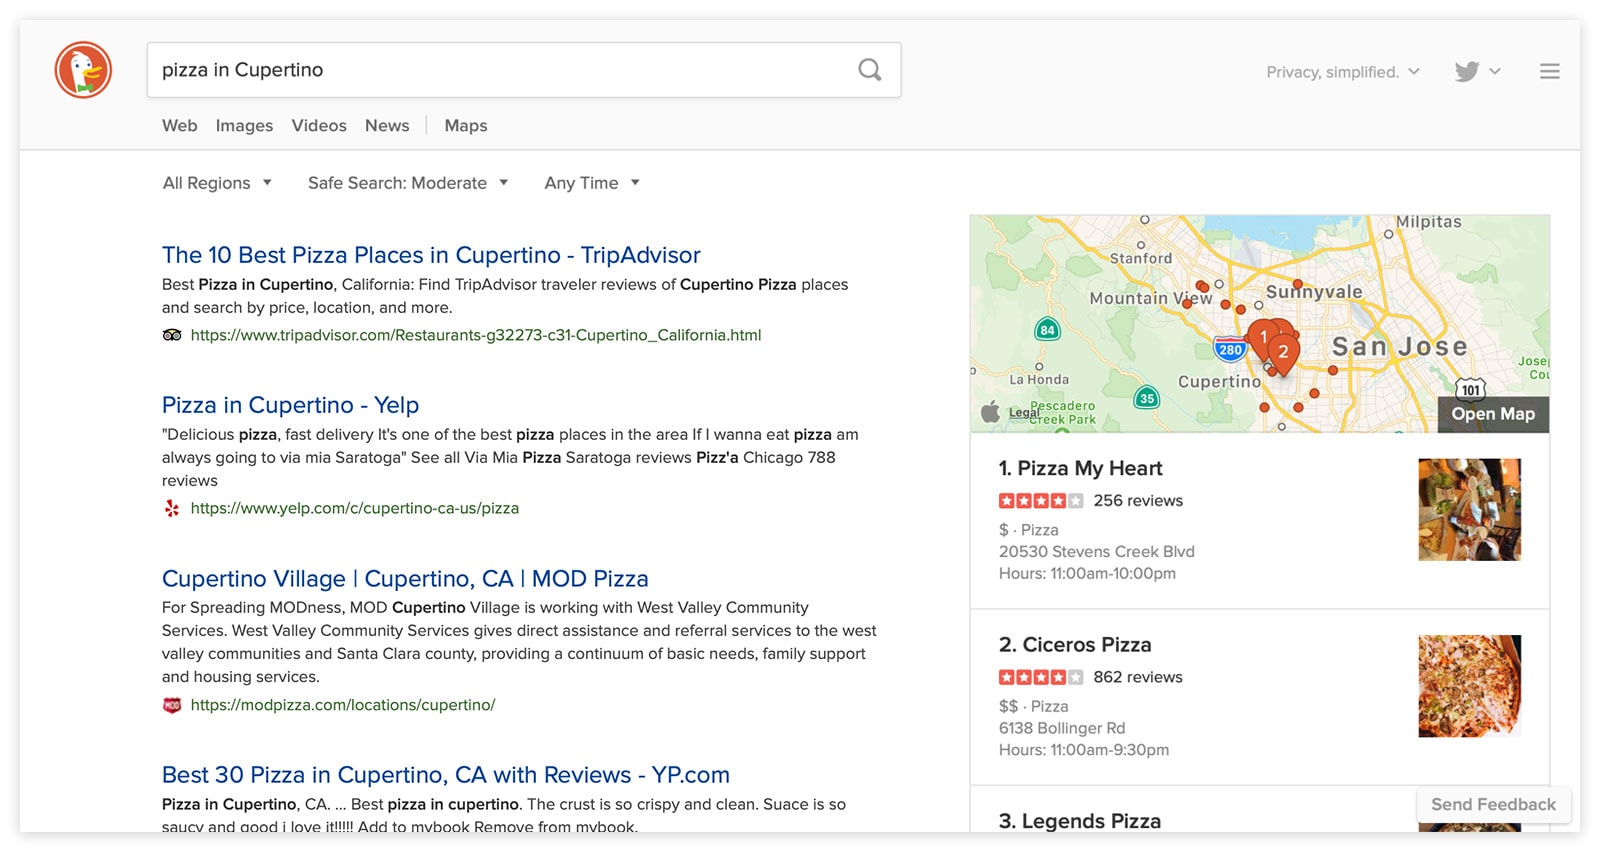 DuckDuckGo searches can now include Apple Maps data without violating your privacy.